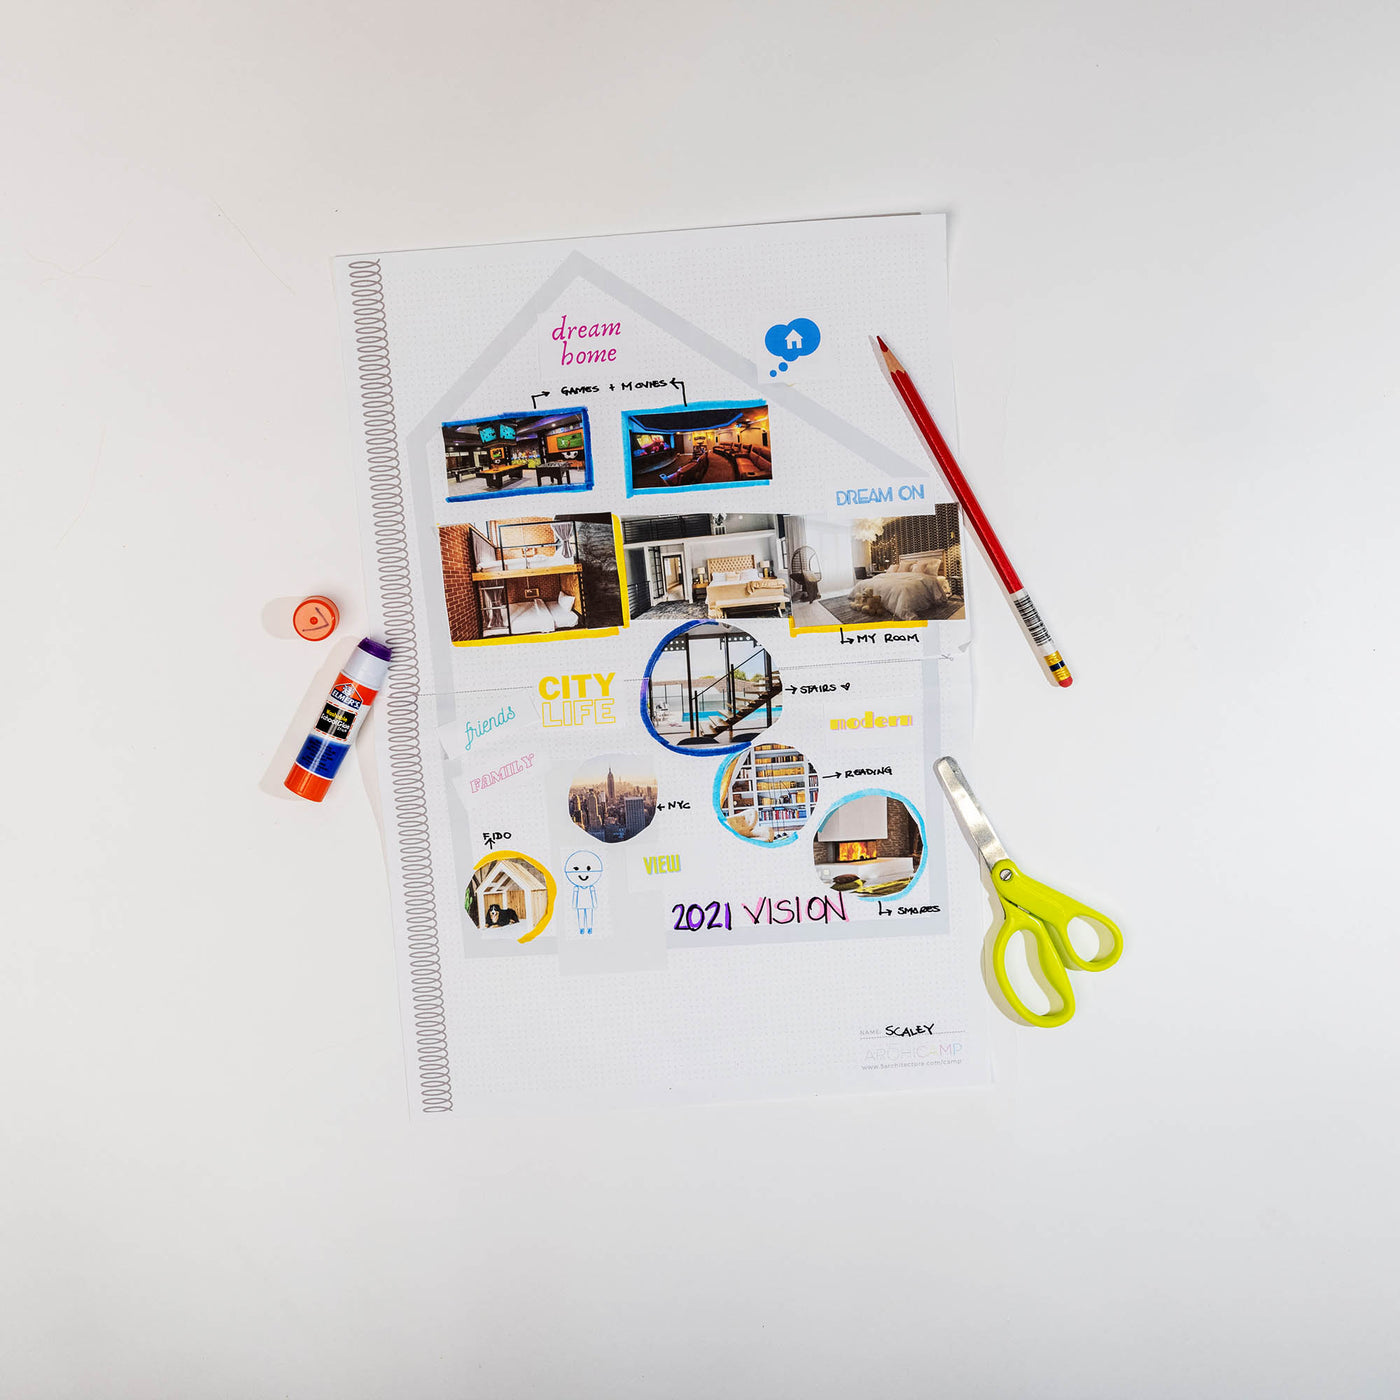 Create Your Own Dream Home Vision Board